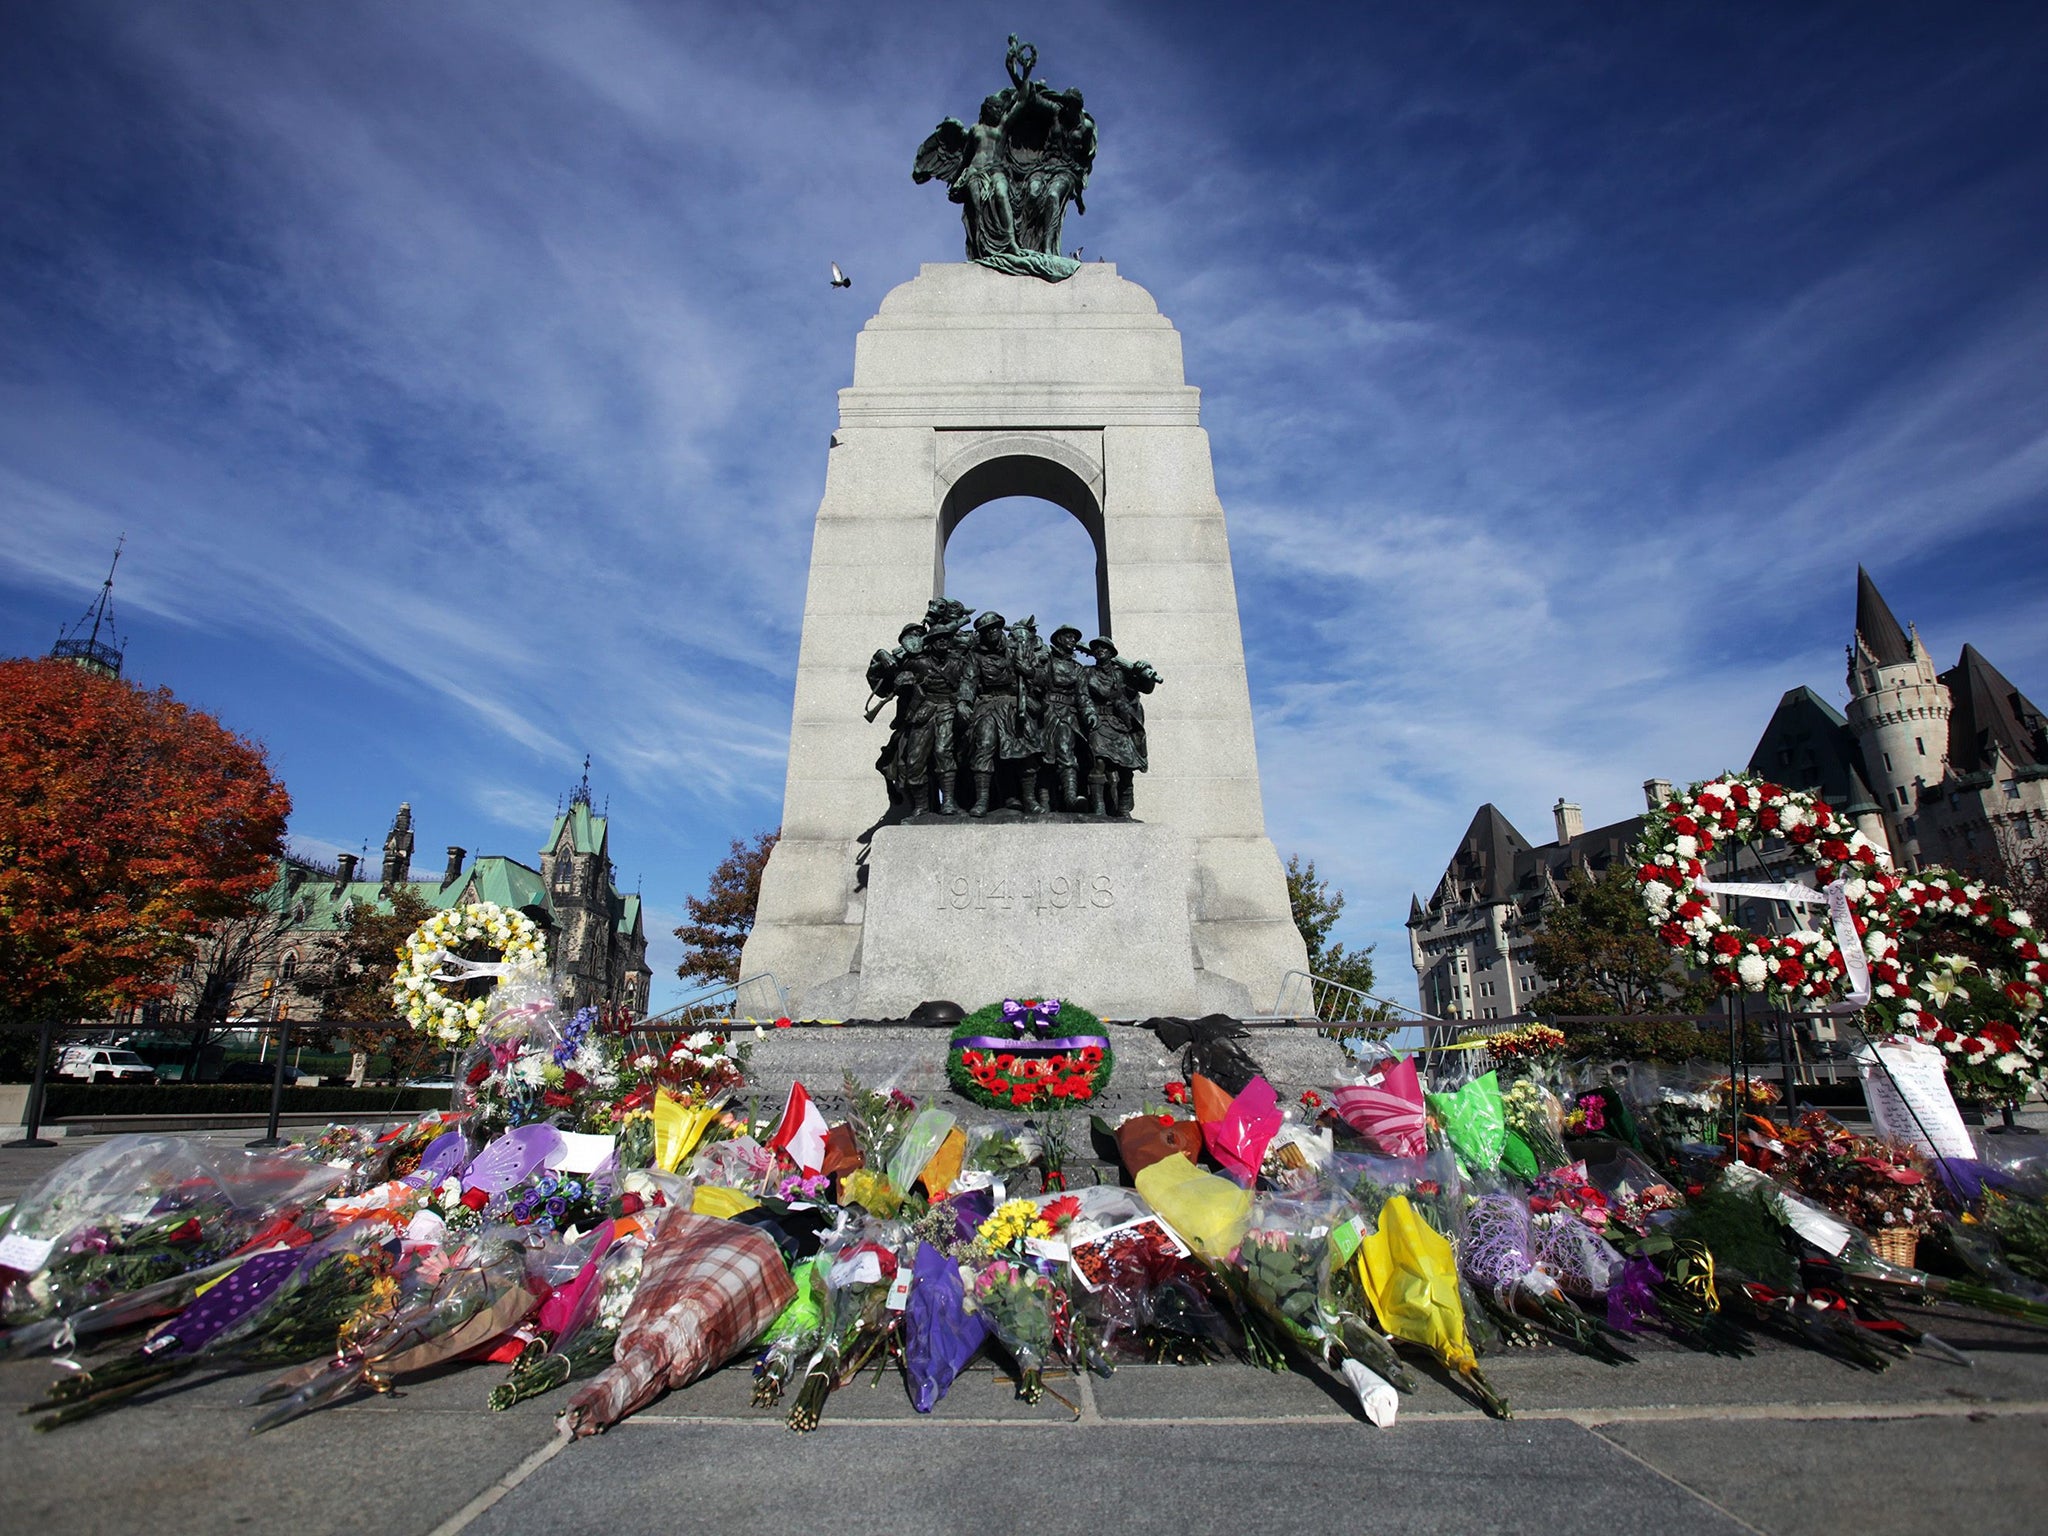 Flowers were left for Corporal Nathan Cirillo at the National War Memorial in Ottawa yesterday